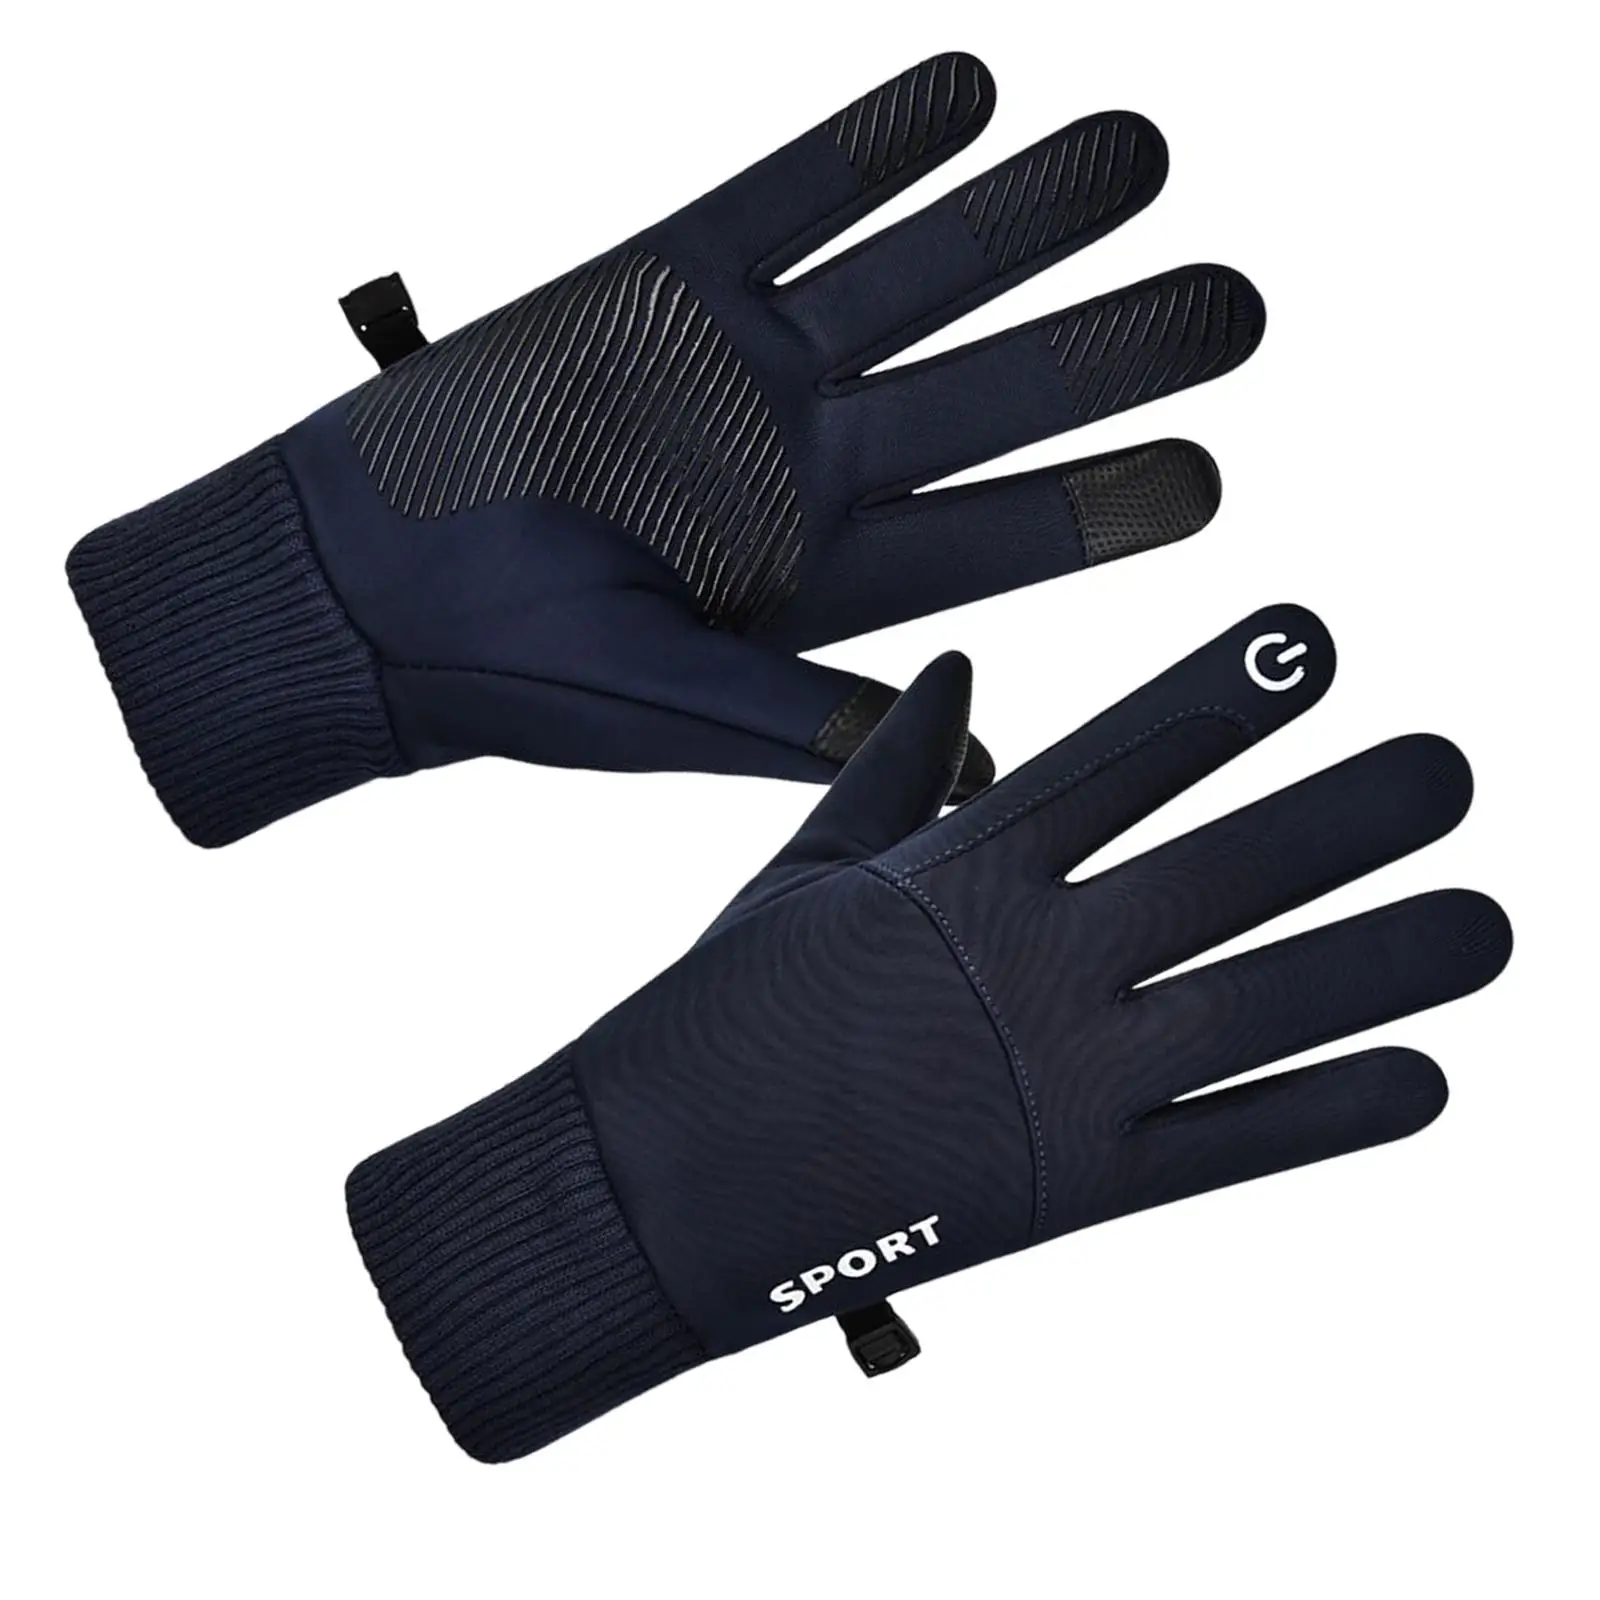 Gloves, Waterproof, Durable, Non-slip, Touch Screen, Soft, Fashionable,